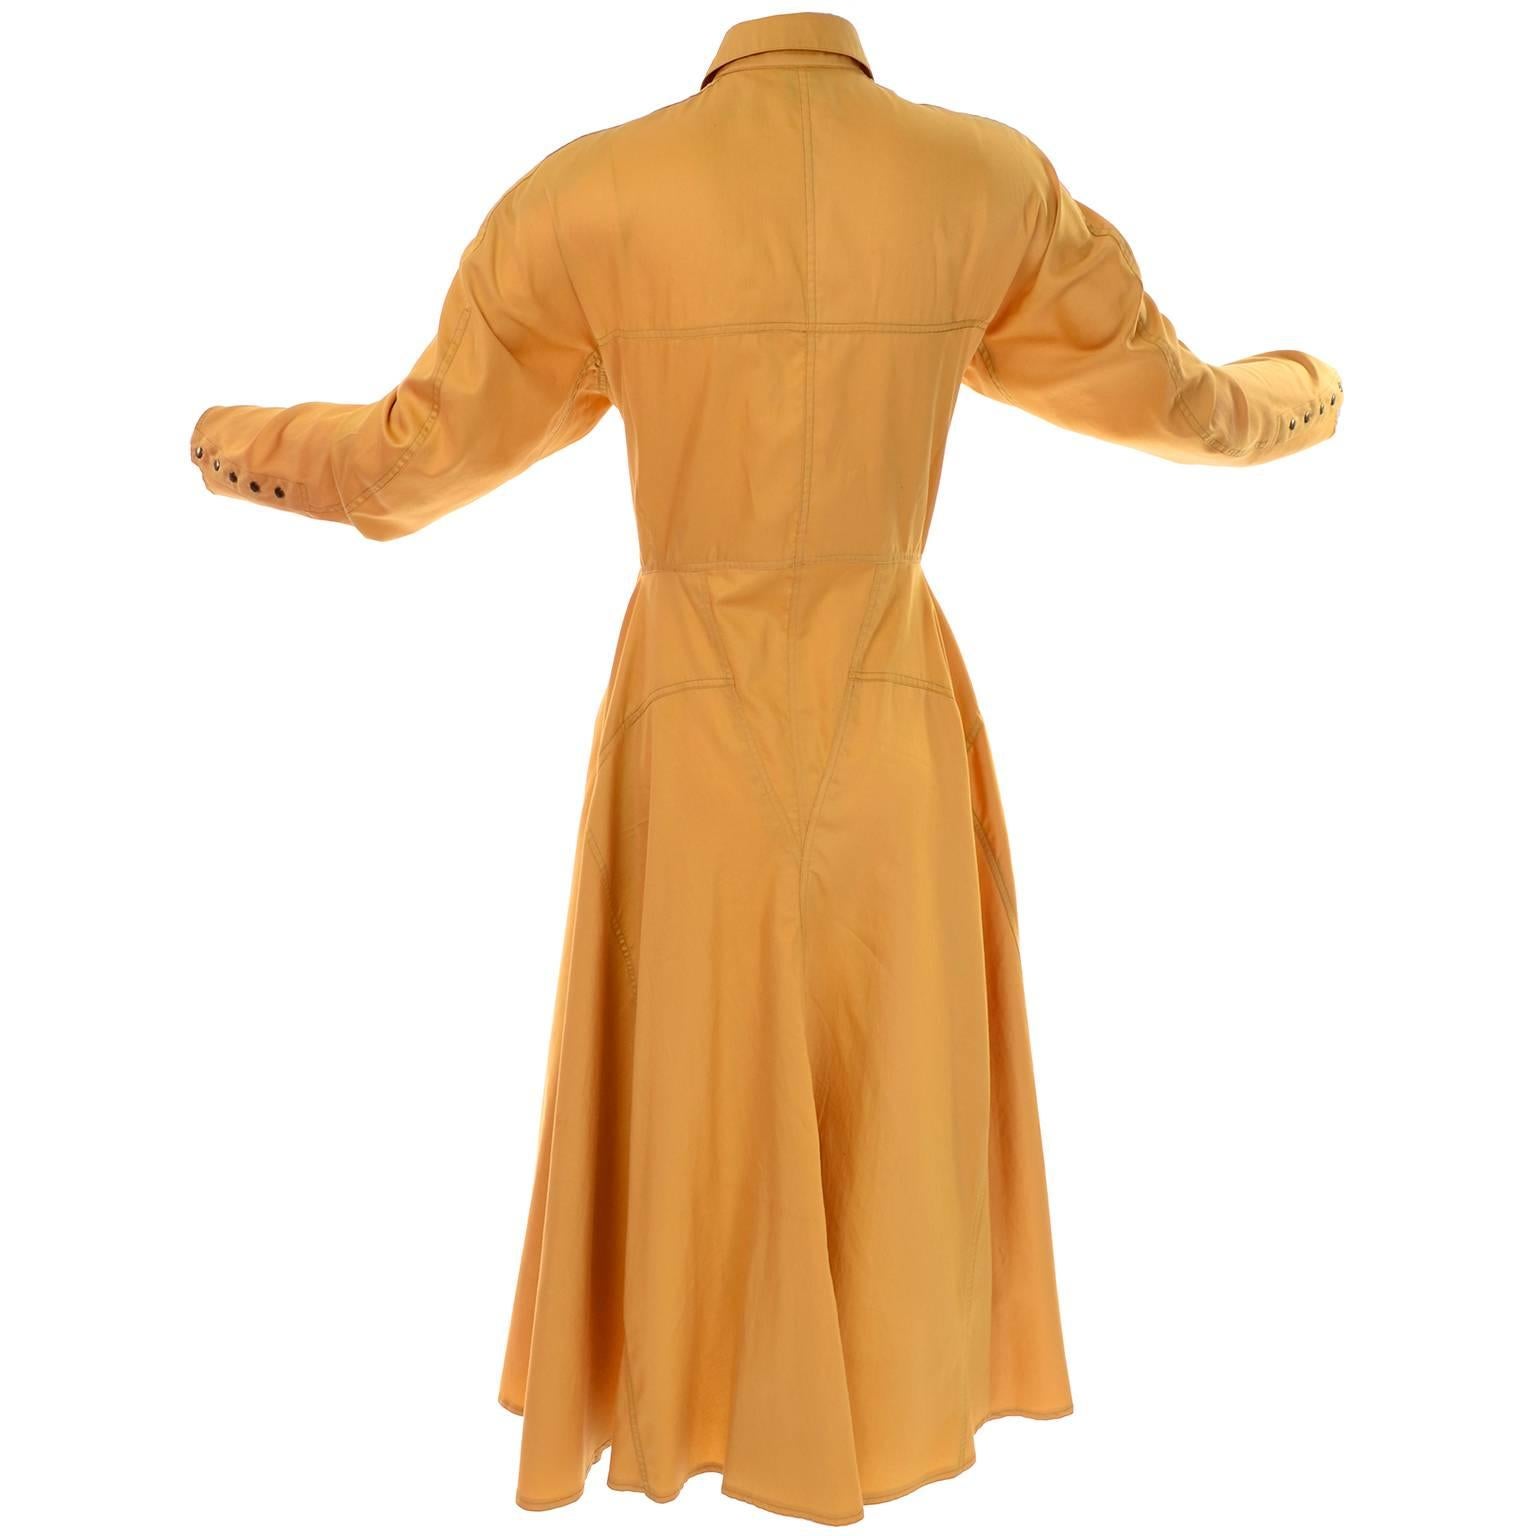 Women's 1980s Alaia Vintage Mustard Marigold Dress With a Full Skirt Size 10 French 42